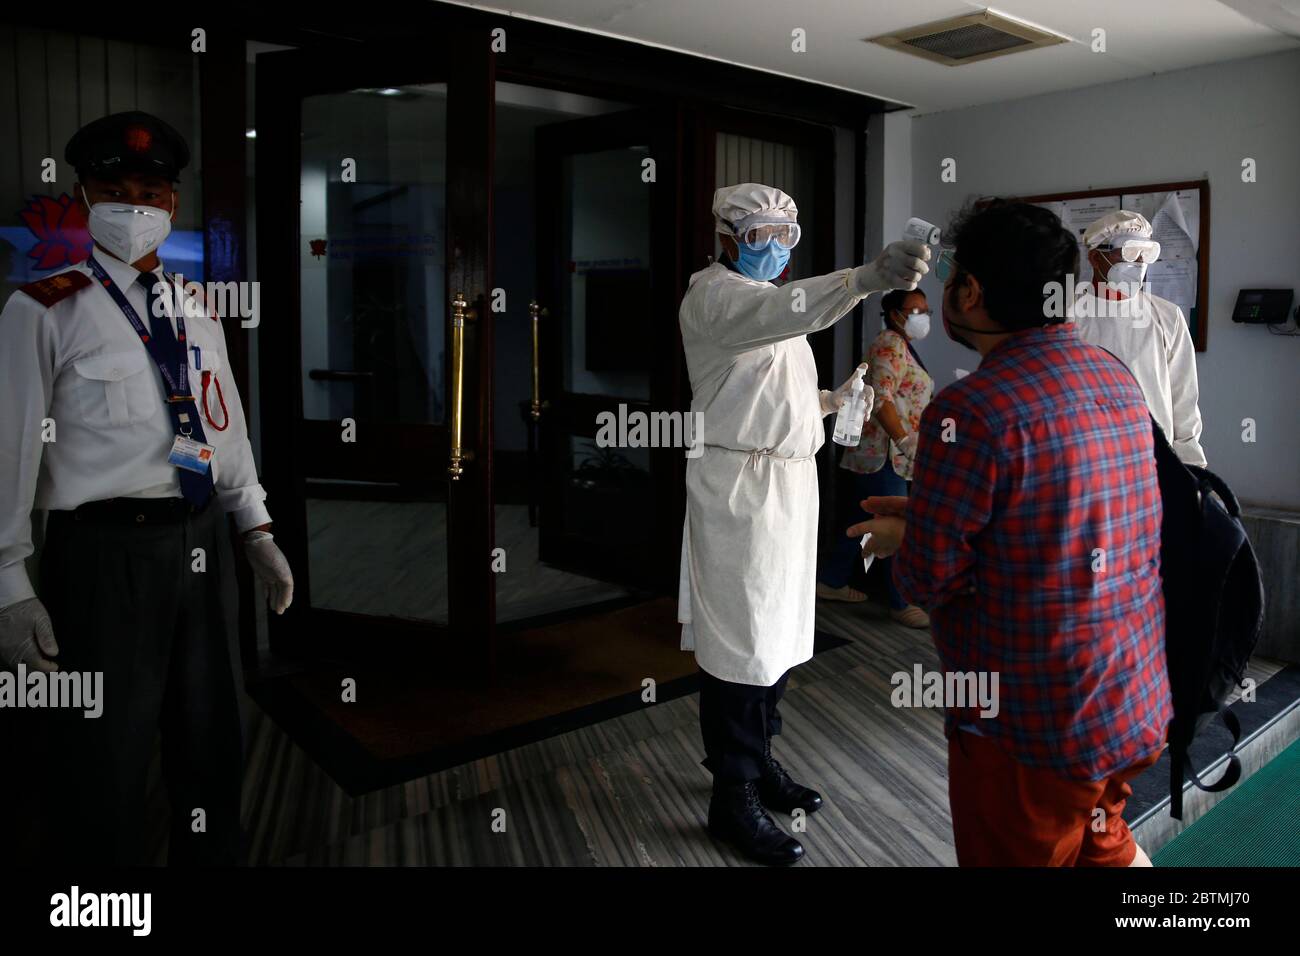 Kathmandu, Nepal. 27th May, 2020. A staffer checks temperature and sanitizes people entering the bank for safety measures amid concerns over the spread of coronavirus disease during the government imposed lockdown at Nepal Investment Bank head office in Kathmandu, Nepal on Wednesday, May 27, 2020. Credit: Skanda Gautam/ZUMA Wire/Alamy Live News Stock Photo